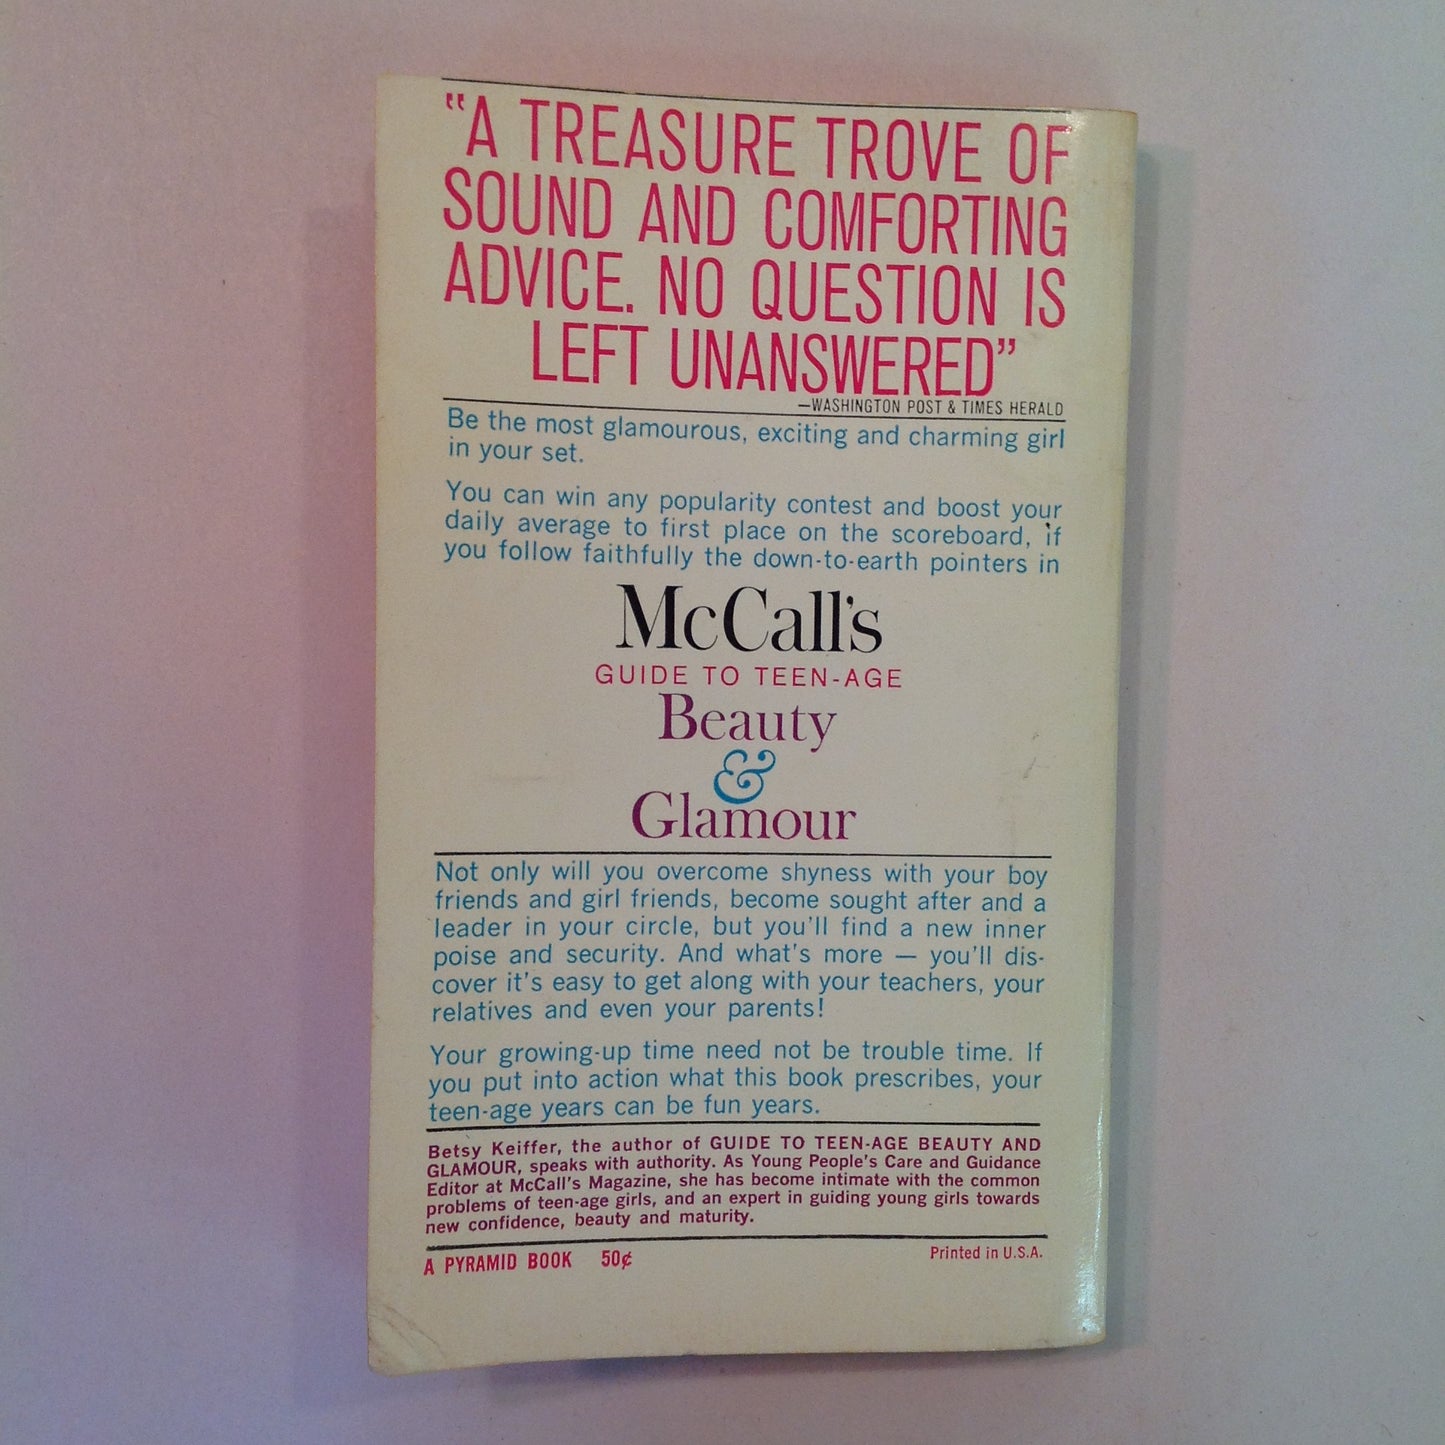 Vintage 1965 MM Paperback McCall's Guide to Teen-Age Beauty & Glamour